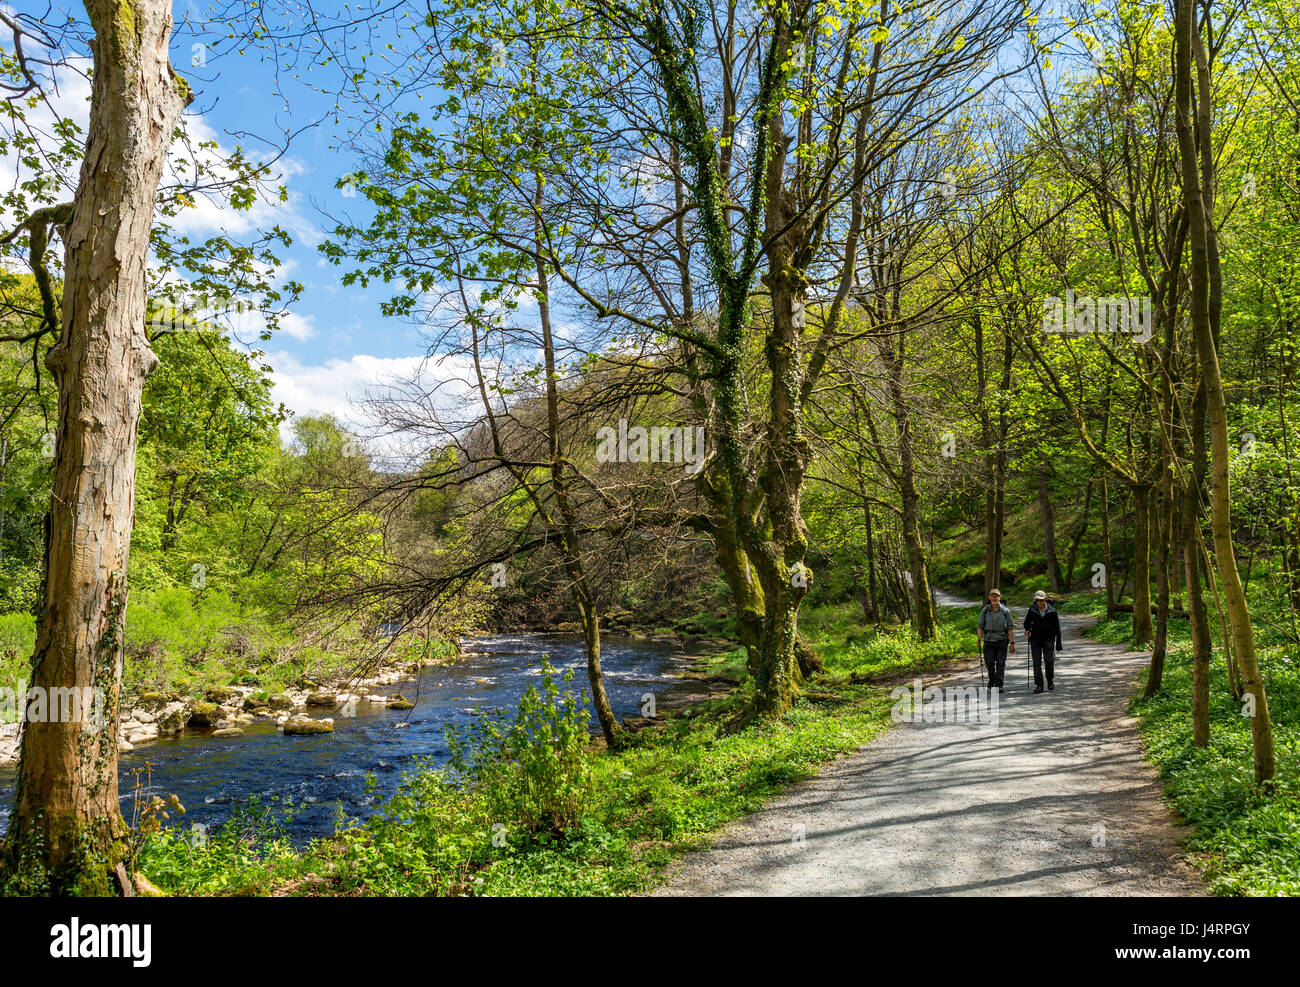 Walkers on Dales Way footpath by River Wharfe, Strid Wood, nr Bolton Abbey, Wharfedale, Yorkshire Dales National Park, North Yorkshire, England, UK Stock Photo